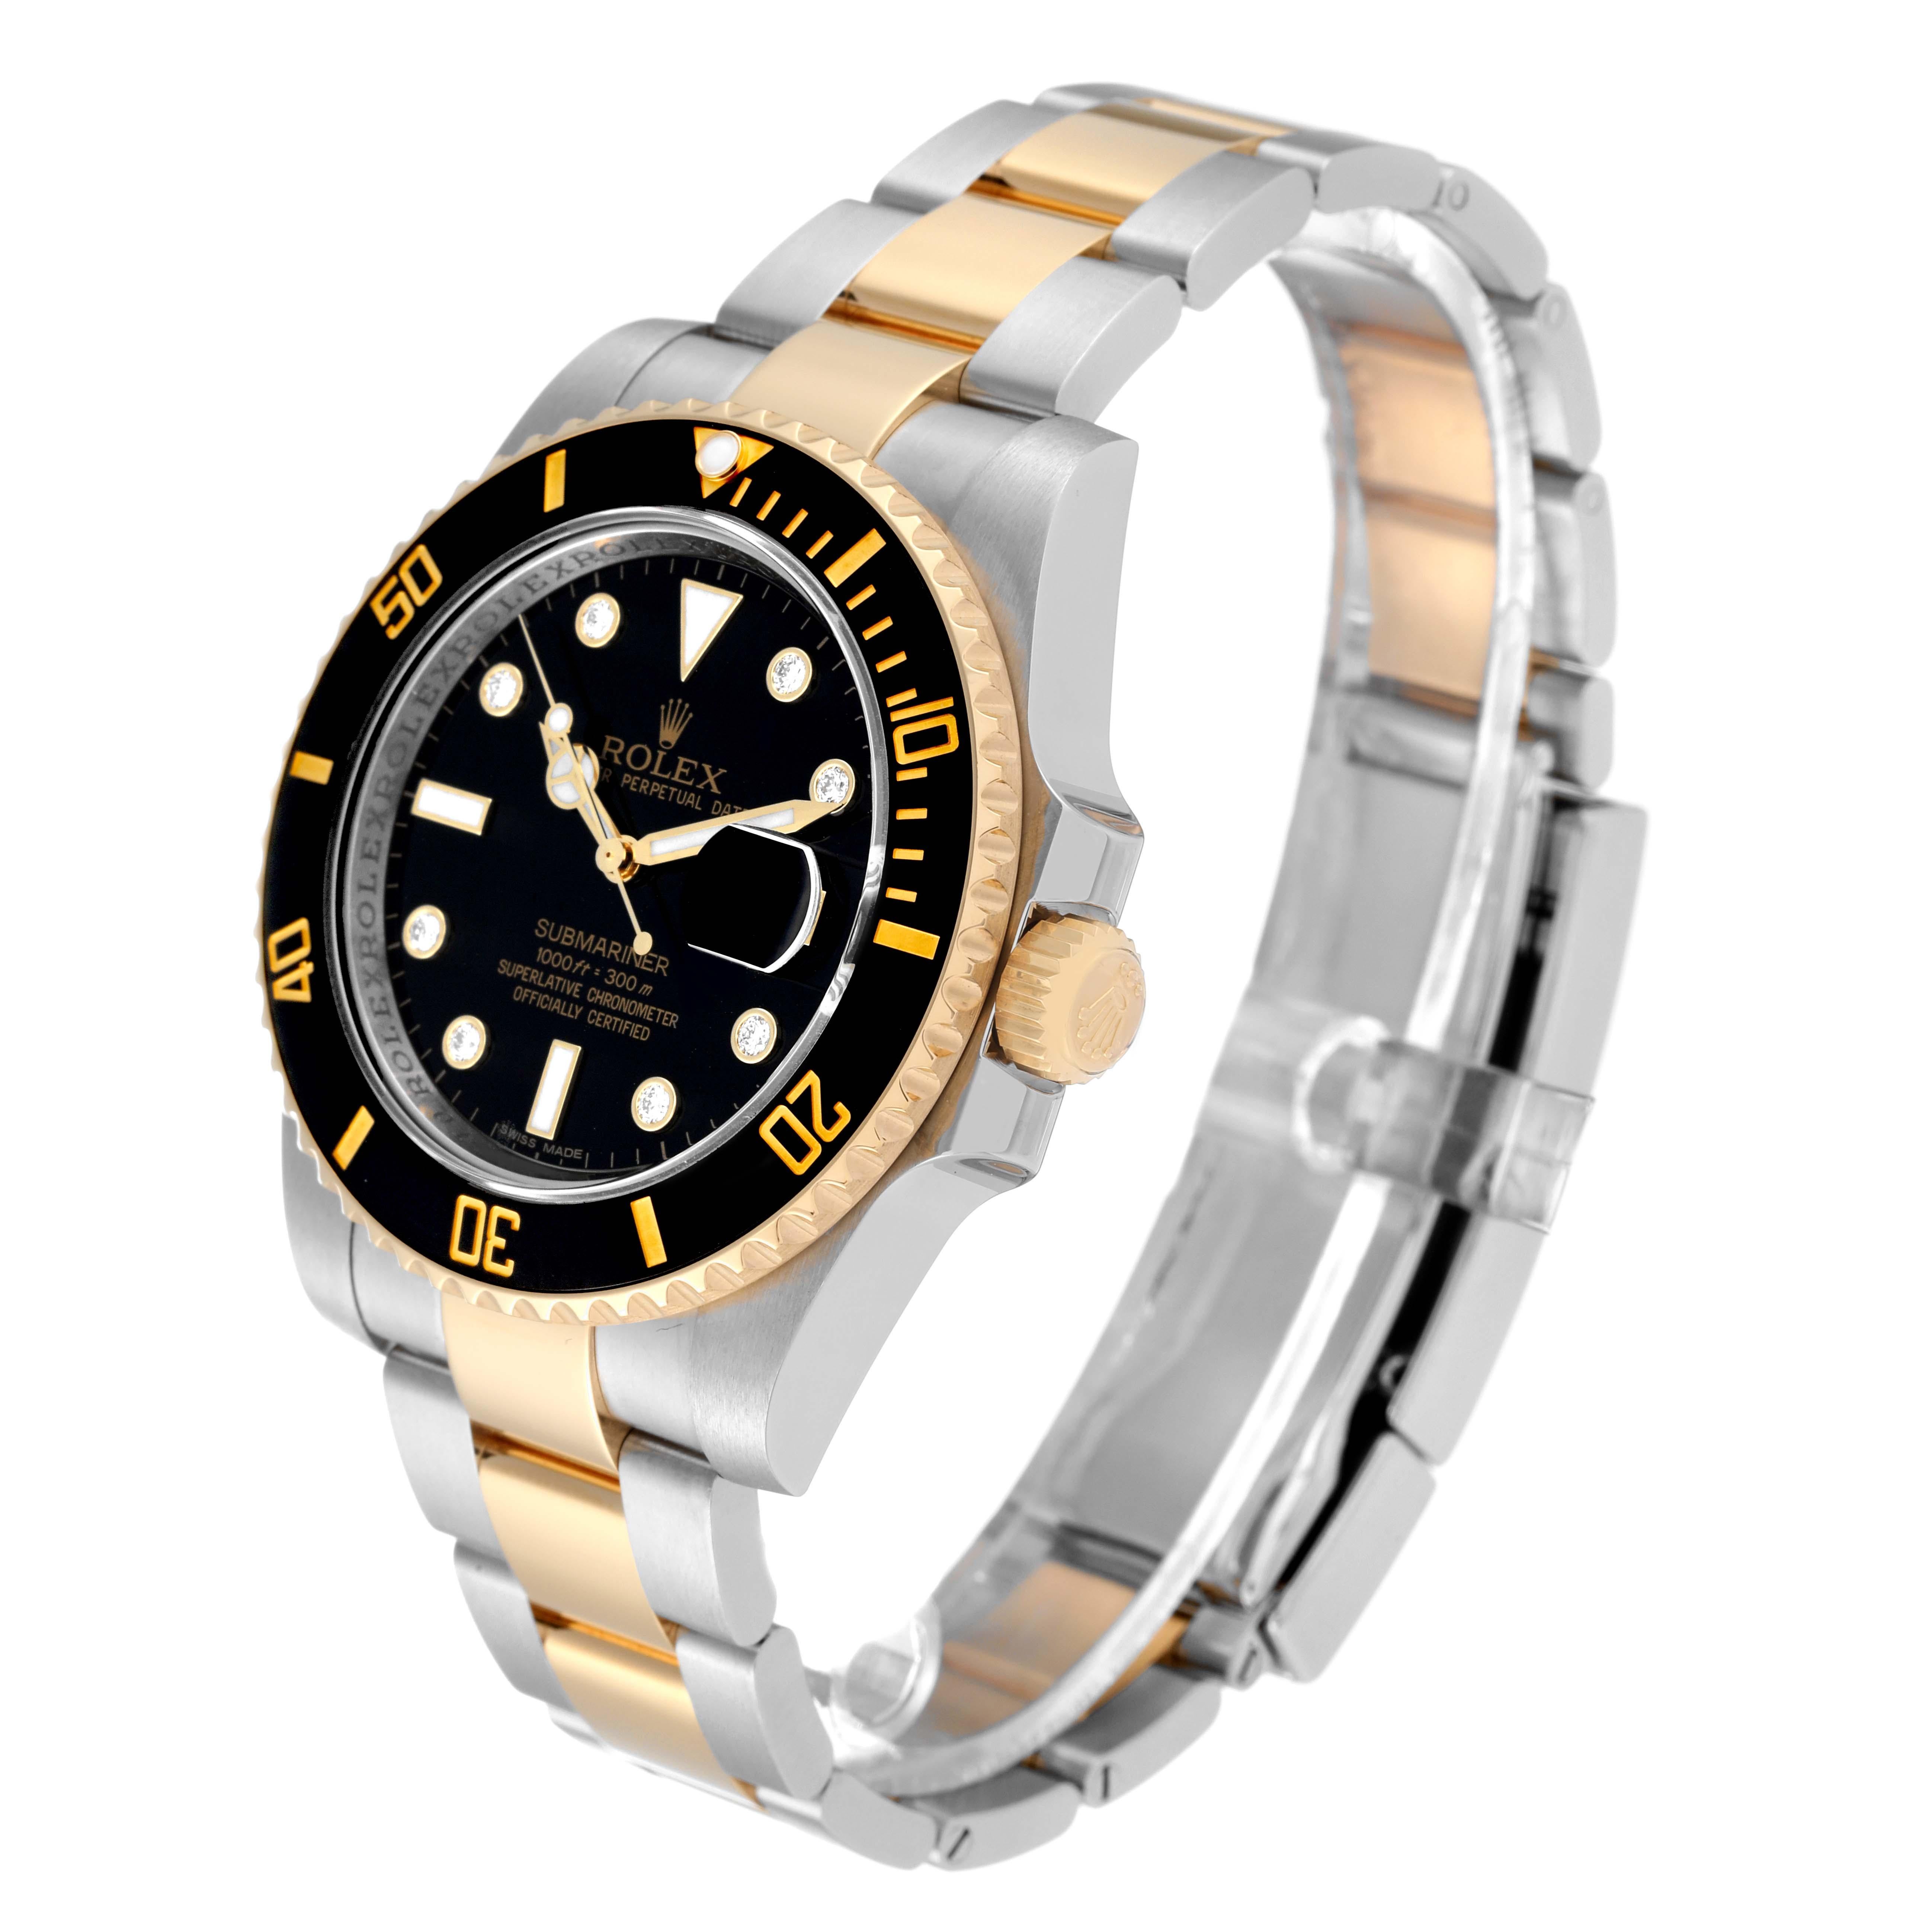 Rolex Submariner Steel Yellow Gold Black Diamond Dial Mens Watch 116613 Box Card For Sale 2